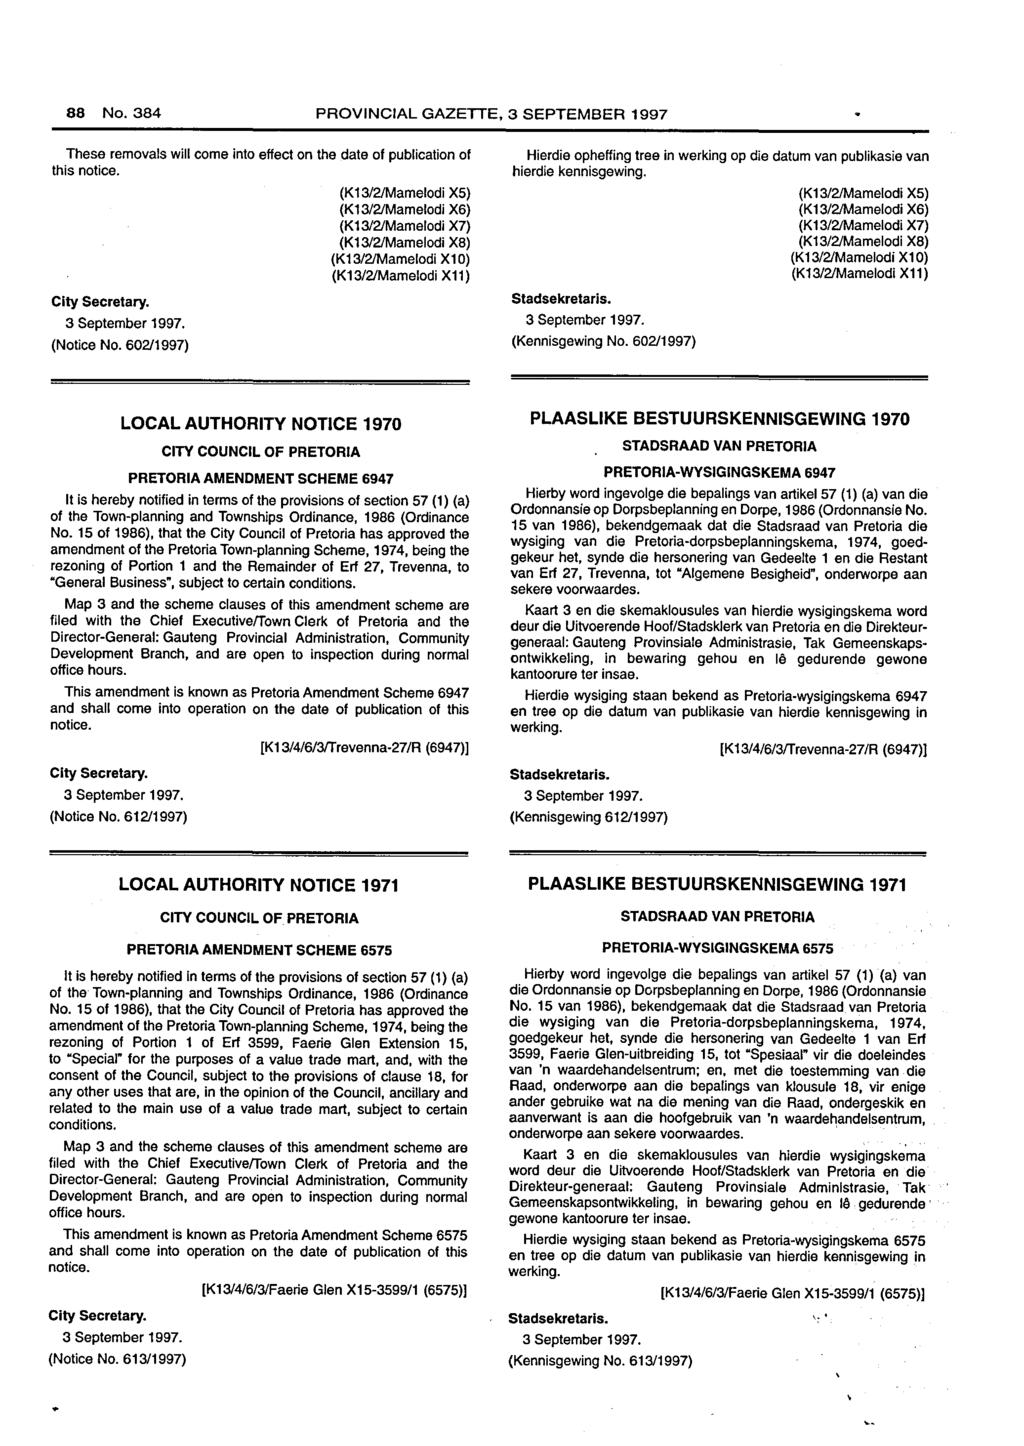 88 No. PROVINCIAL GAZETTE, 3 SEPTEMBER 1997 These removals will come into effect on the date of publication of this notice. City Secretary. (Notice No.